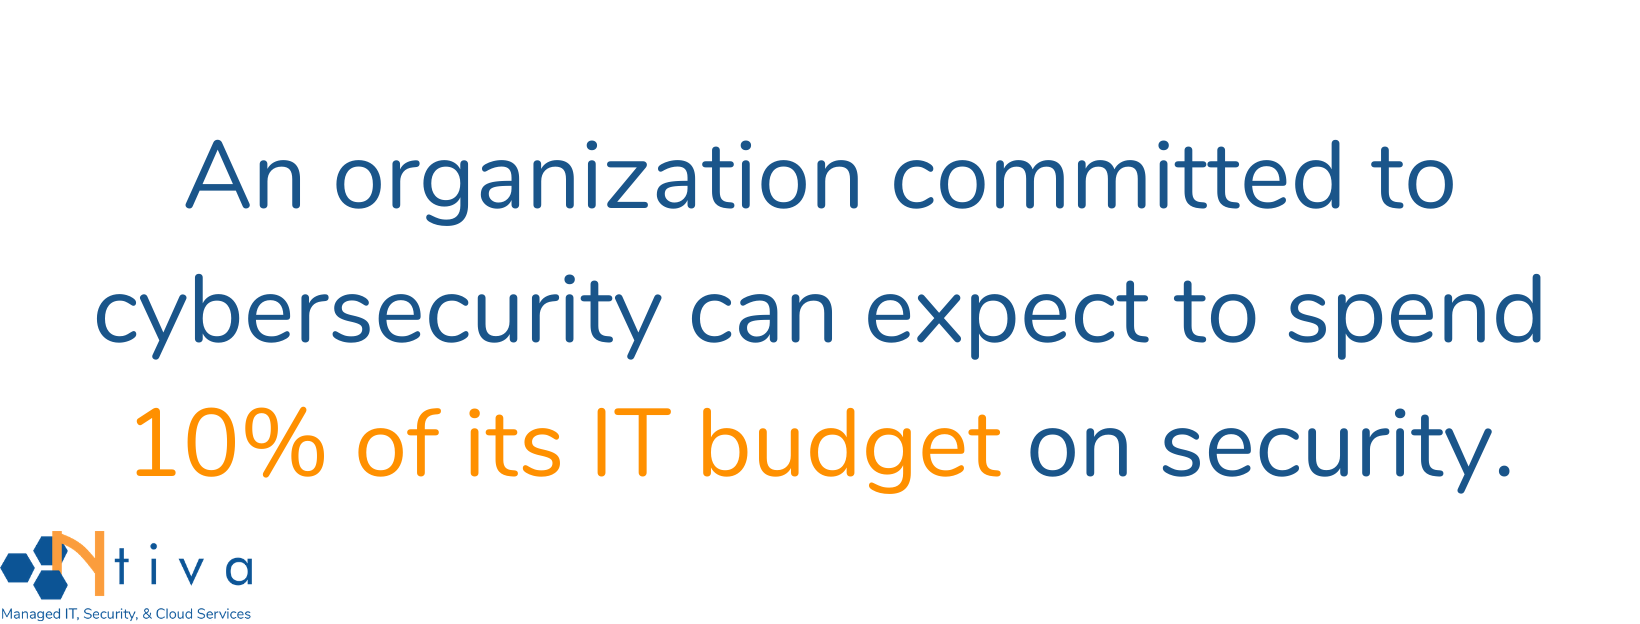 cybersecurity budgets